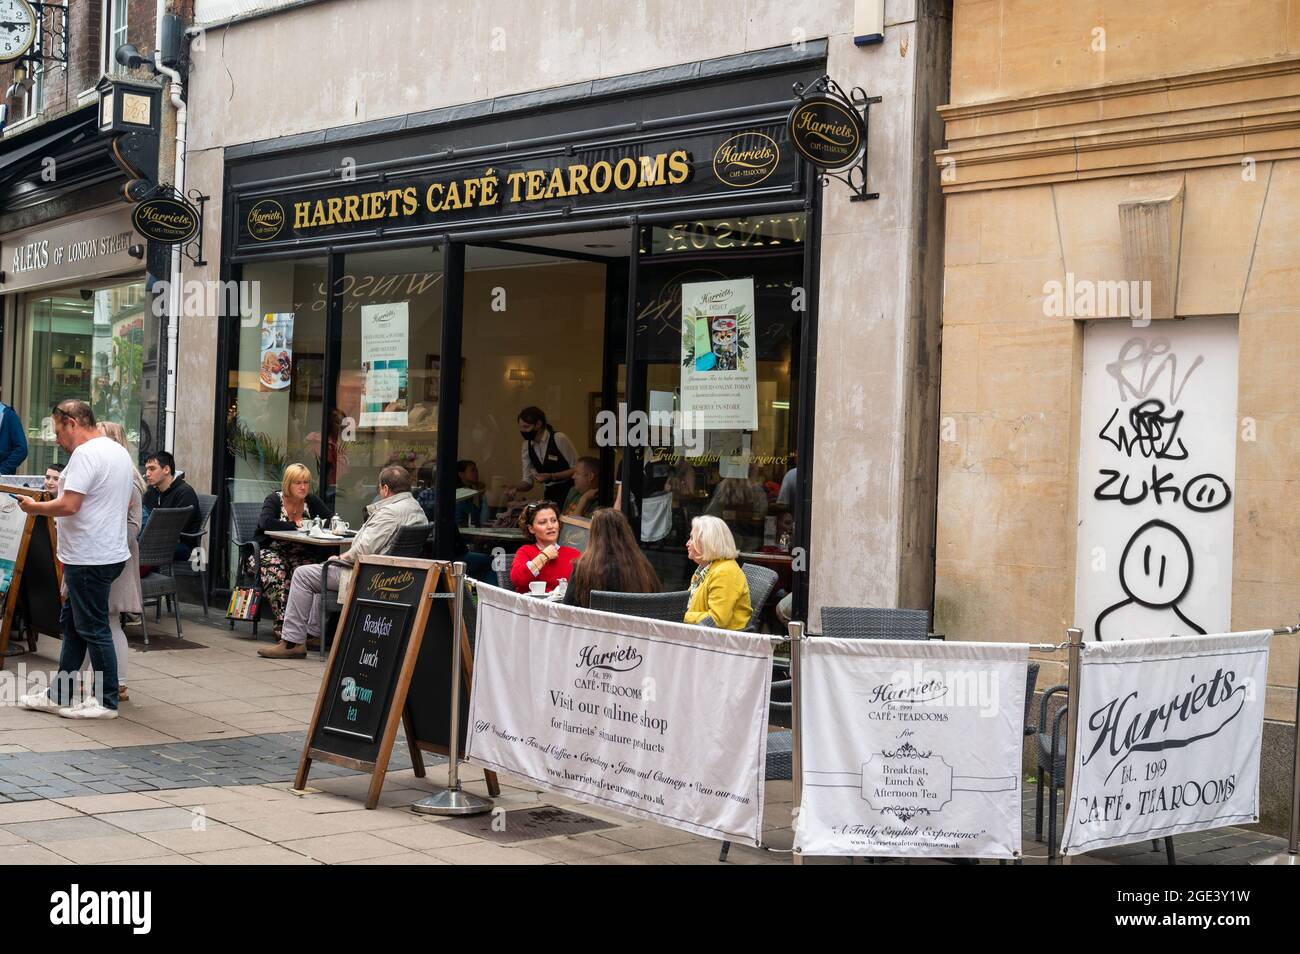 Harriets cafe Tearooms on london Street Norwich with people outside sitting down eating and drinking Stock Photo